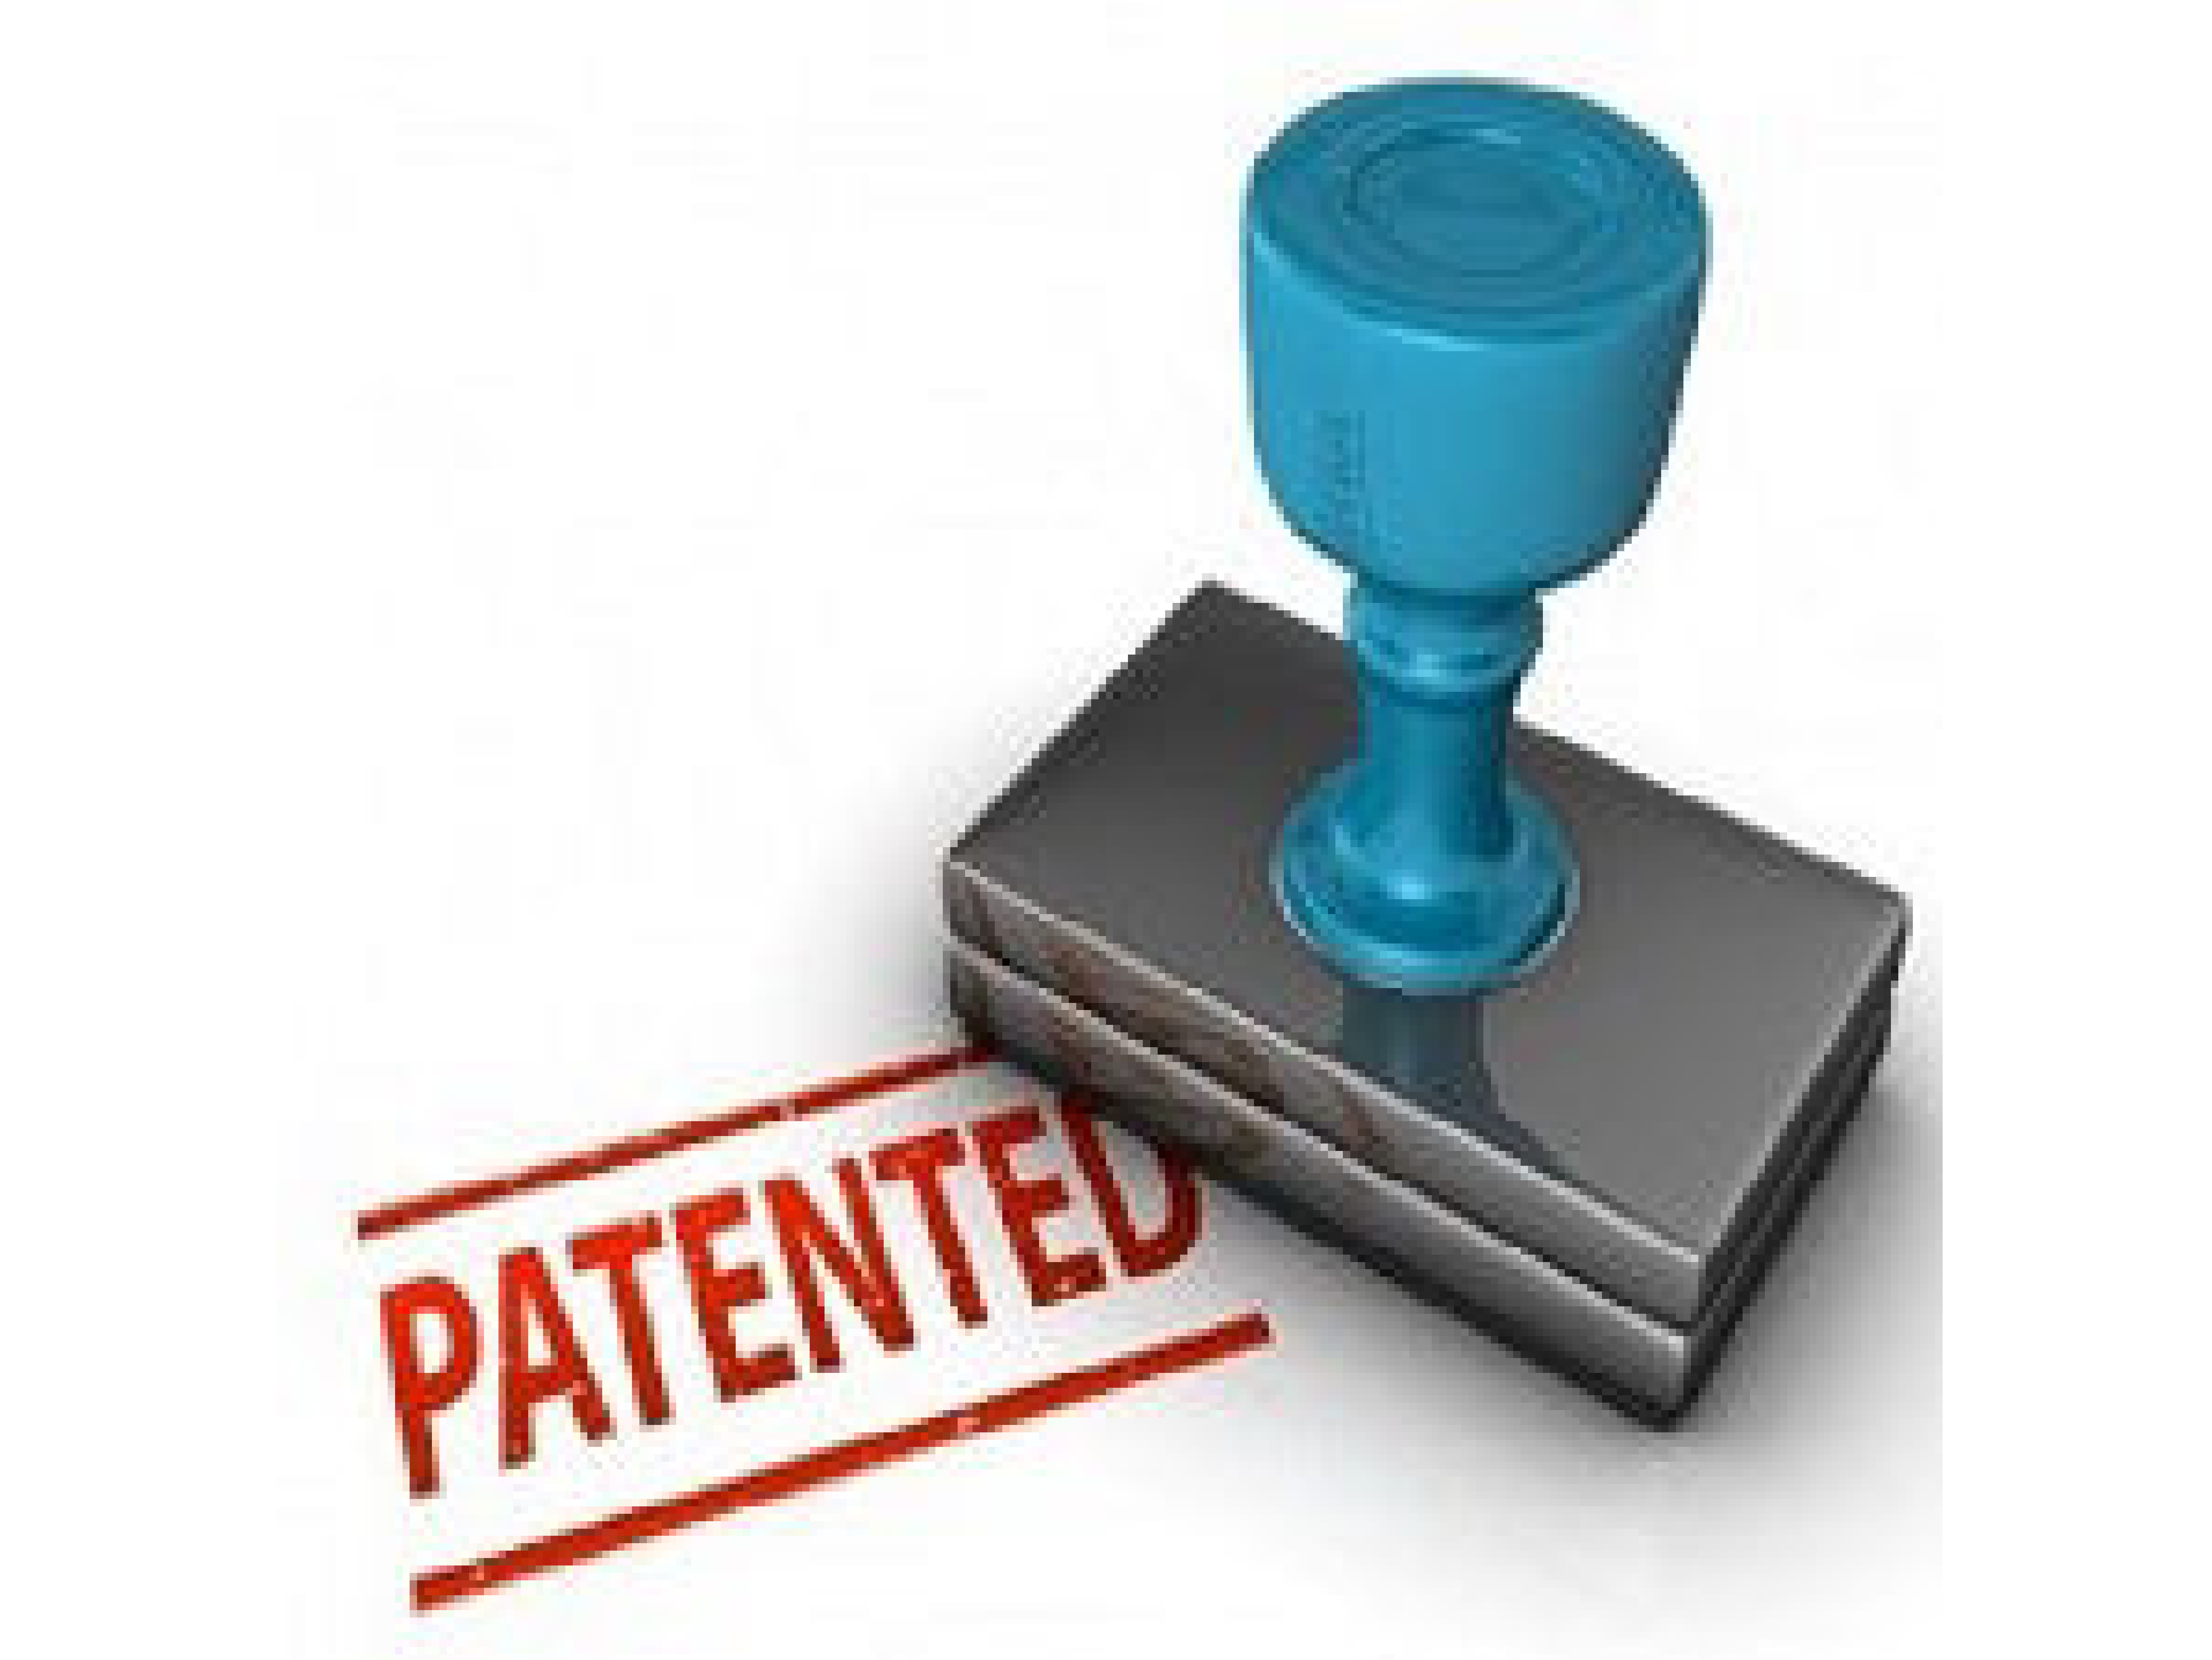 Patent Drafting and Filing